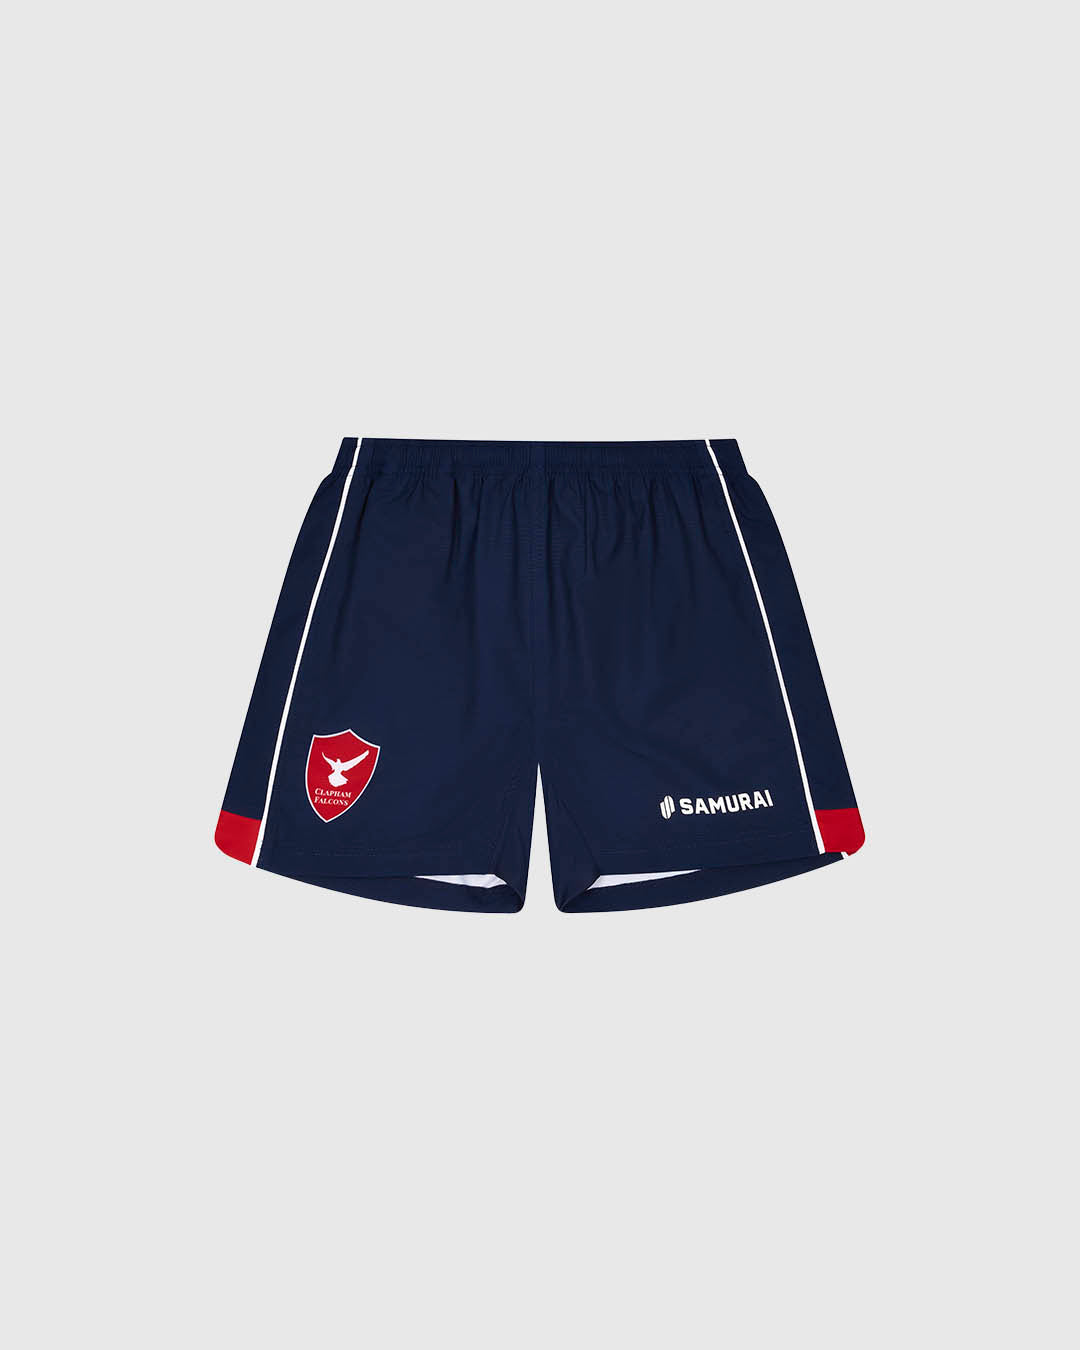 CF:003 - Clapham Falcons Rugby Shorts - Navy